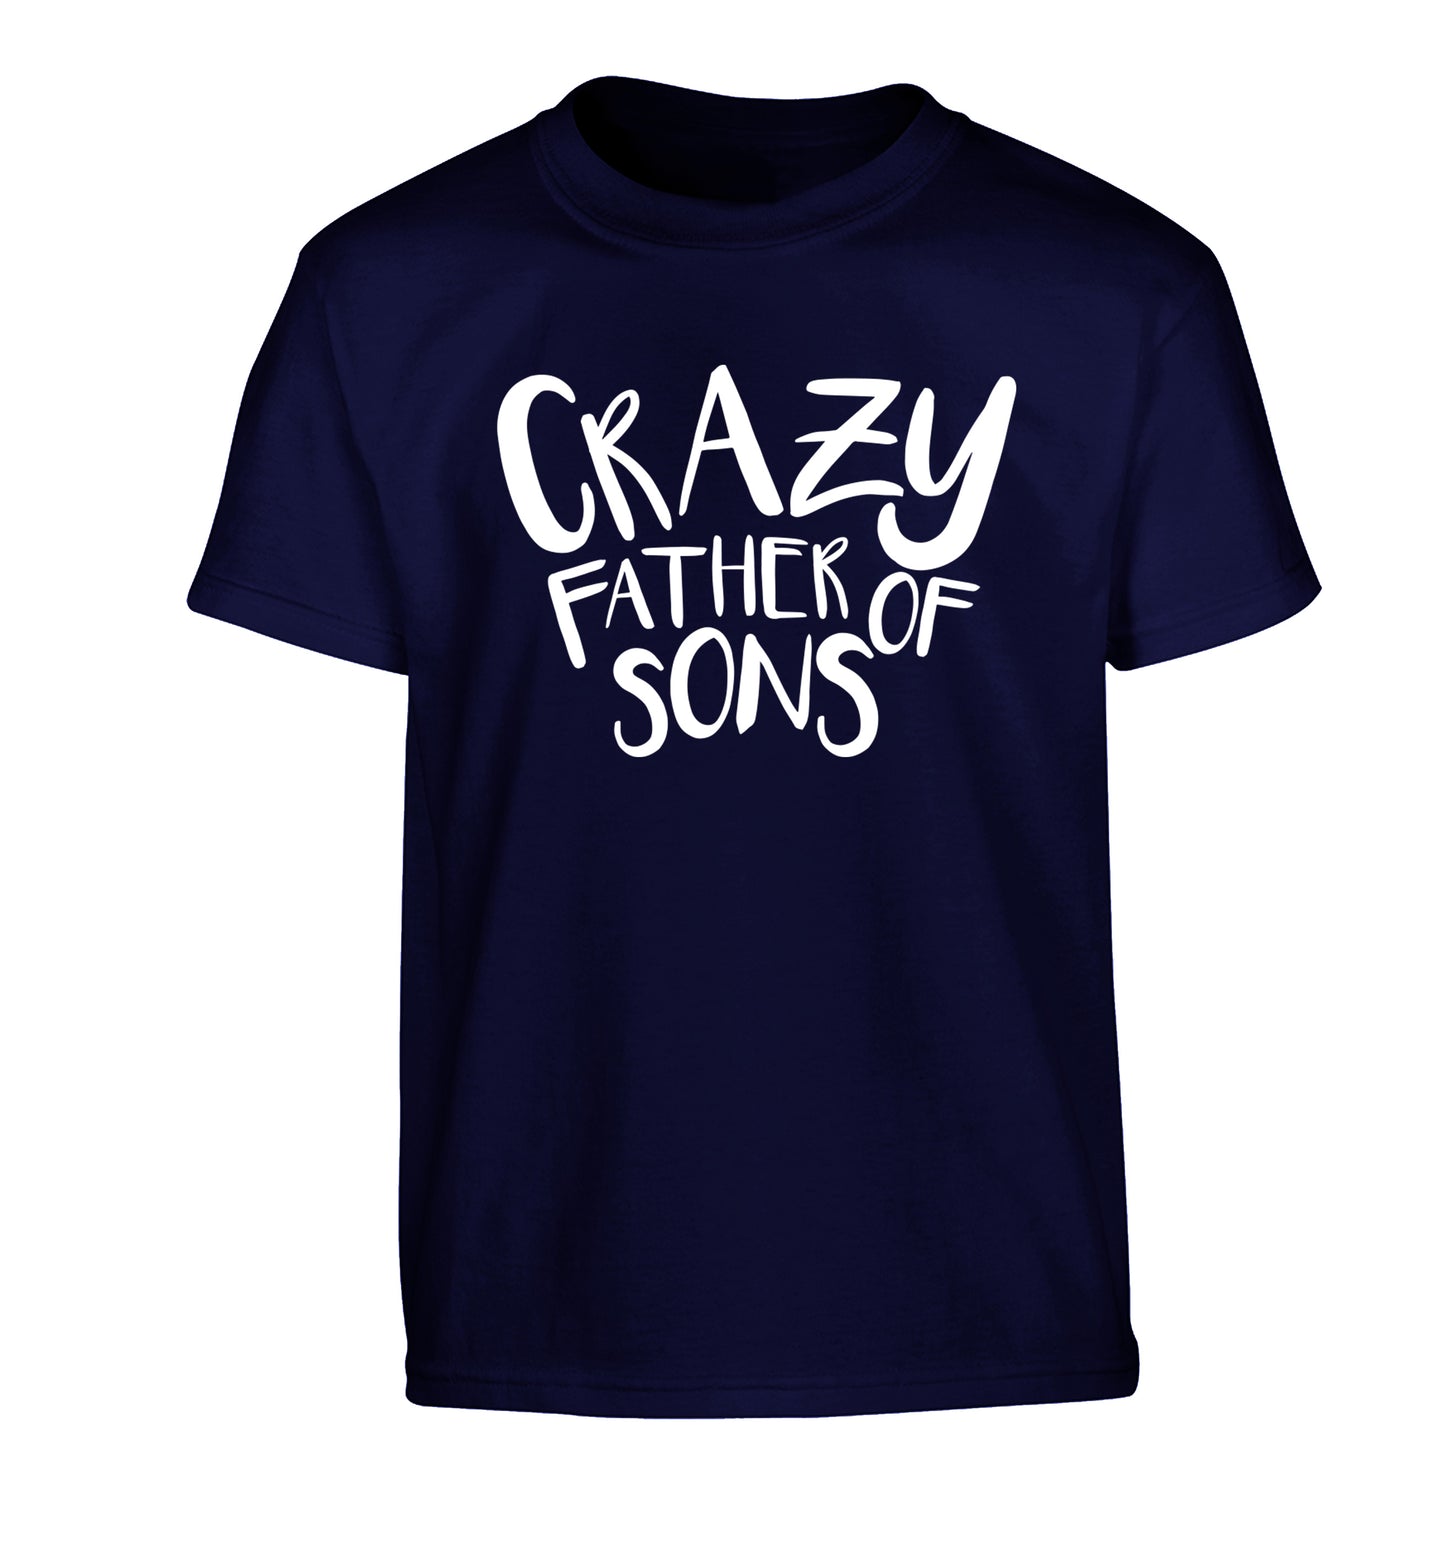 Crazy father of sons Children's navy Tshirt 12-13 Years